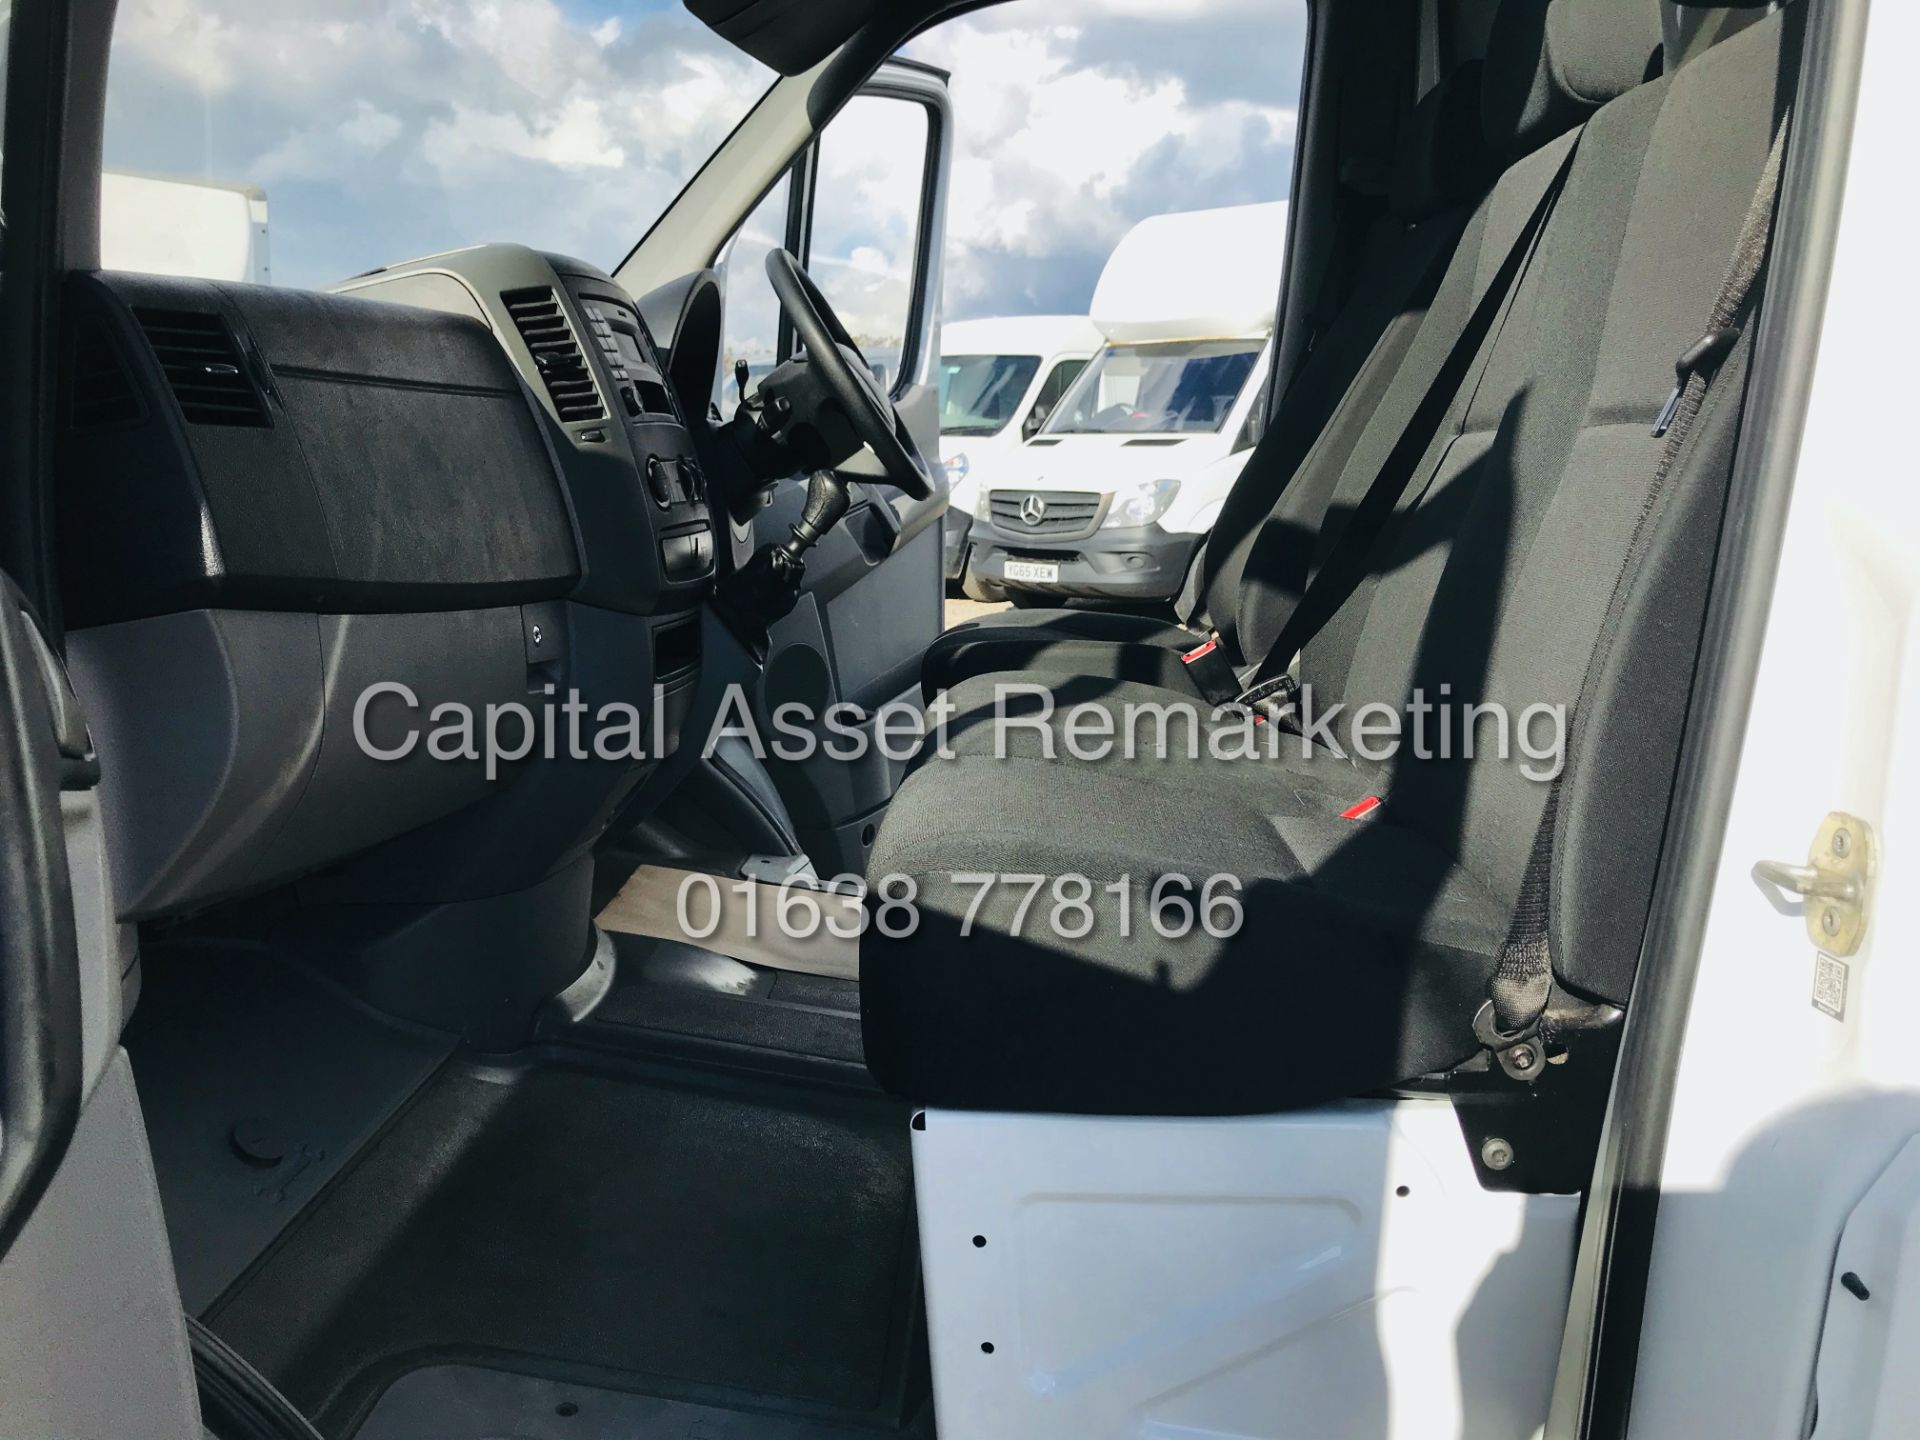 (ON SALE) MERCEDES SPRINTER 314CDI (2018 YEAR) 14FT LUTON TAIL-LIFT *1 OWNER FSH* EURO6 / ULEZ - Image 23 of 25